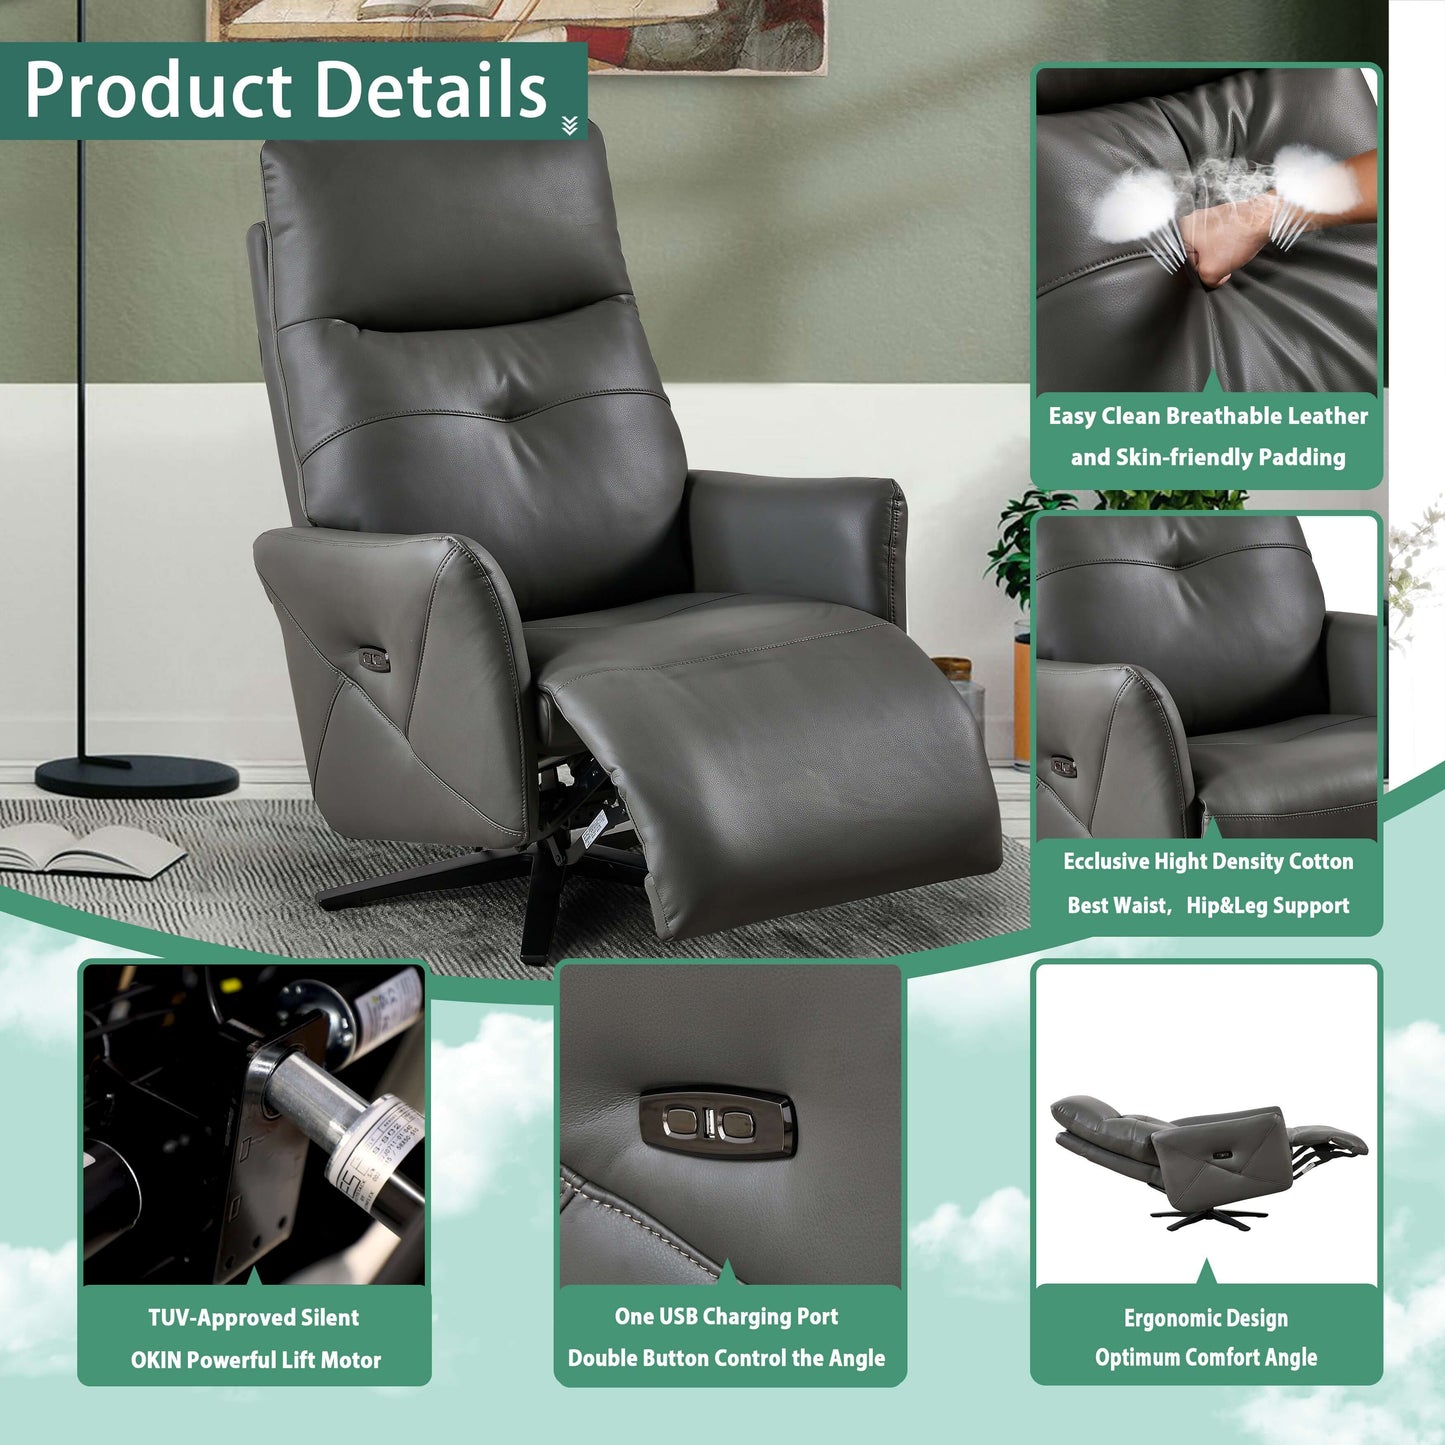 PUG258Y Power Zero Gravity Recliner Chair with Adjustable Headrest,360° Swivel USB Charge Port, Leather - Gray ﻿